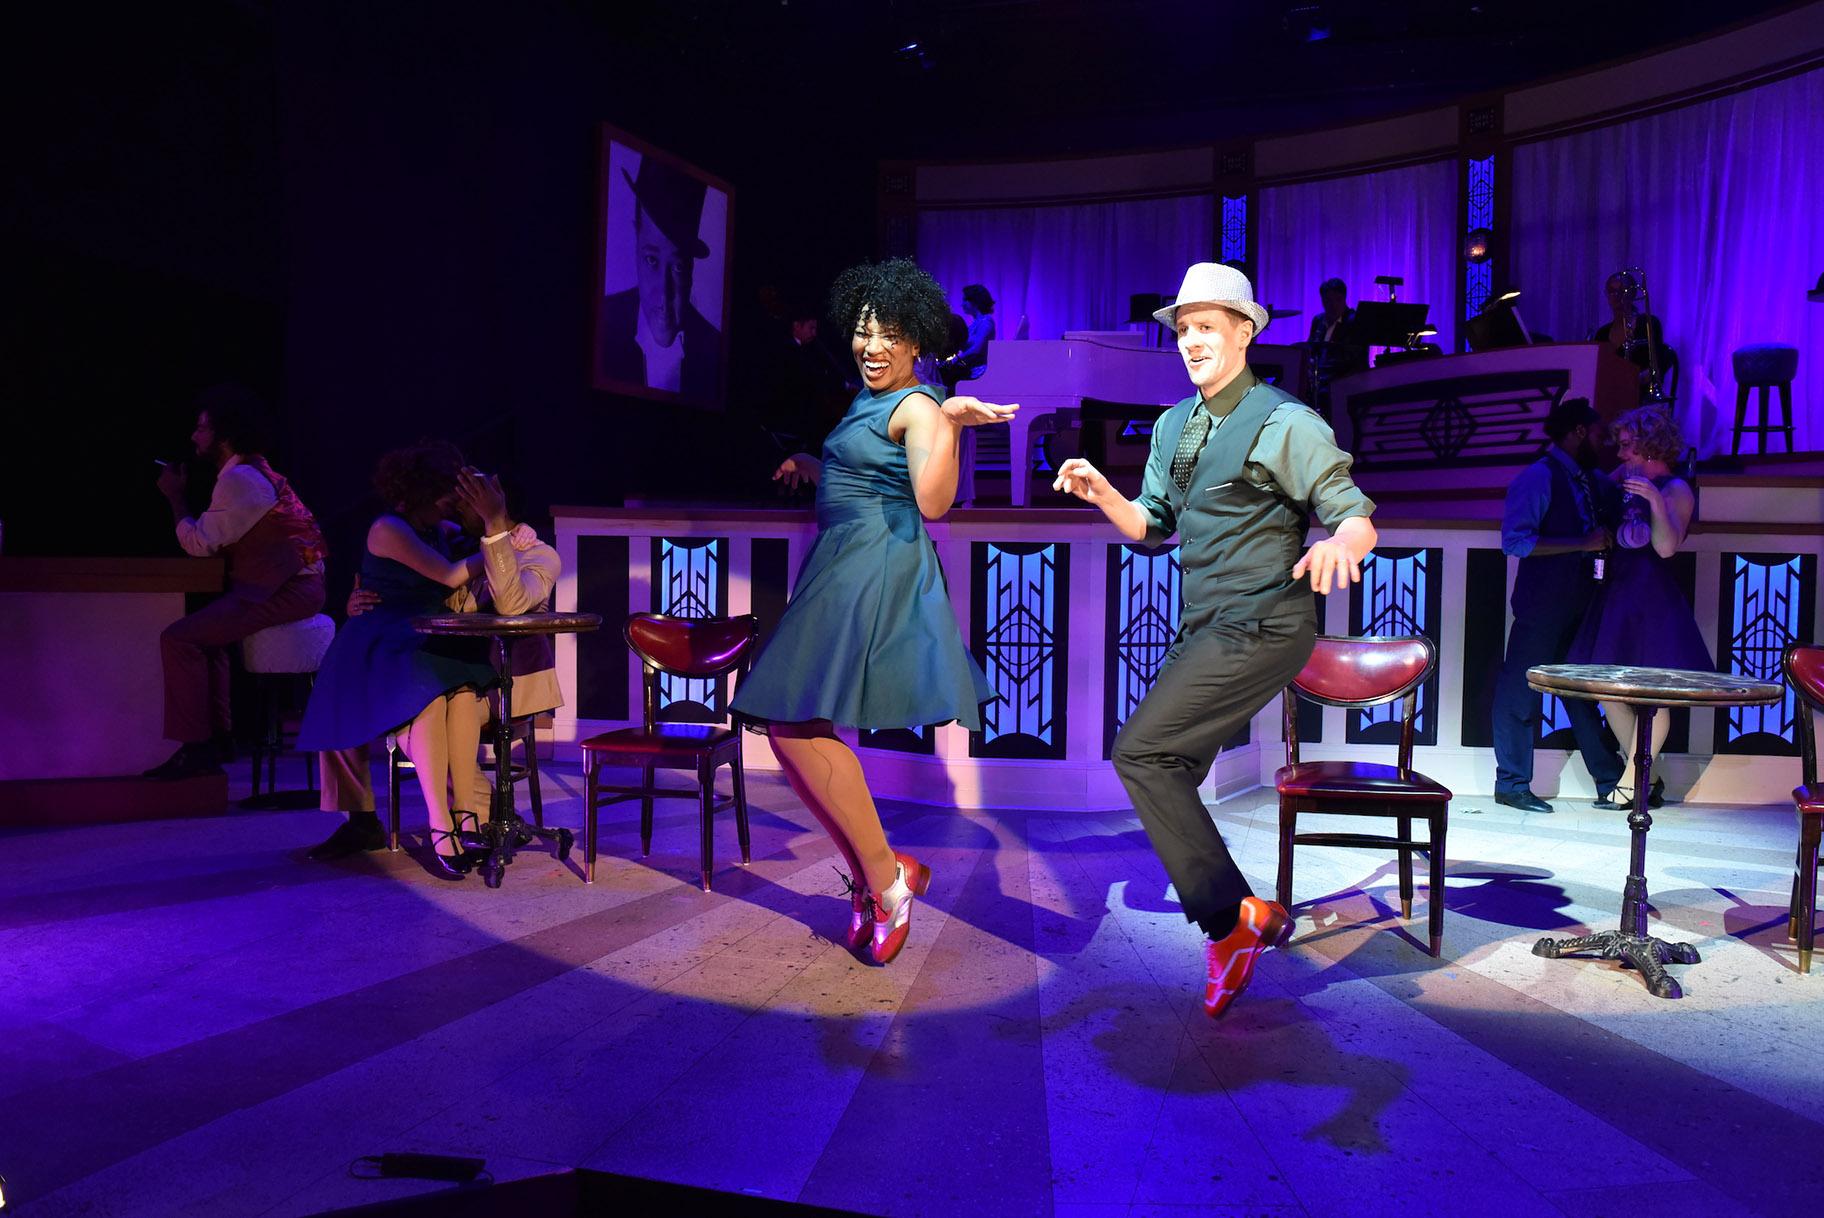 From left: Terri K. Woodall and Tristan Bruns in “Kinda Dukish” from “Sophisticated Ladies.” (Photo by Michael Courier)